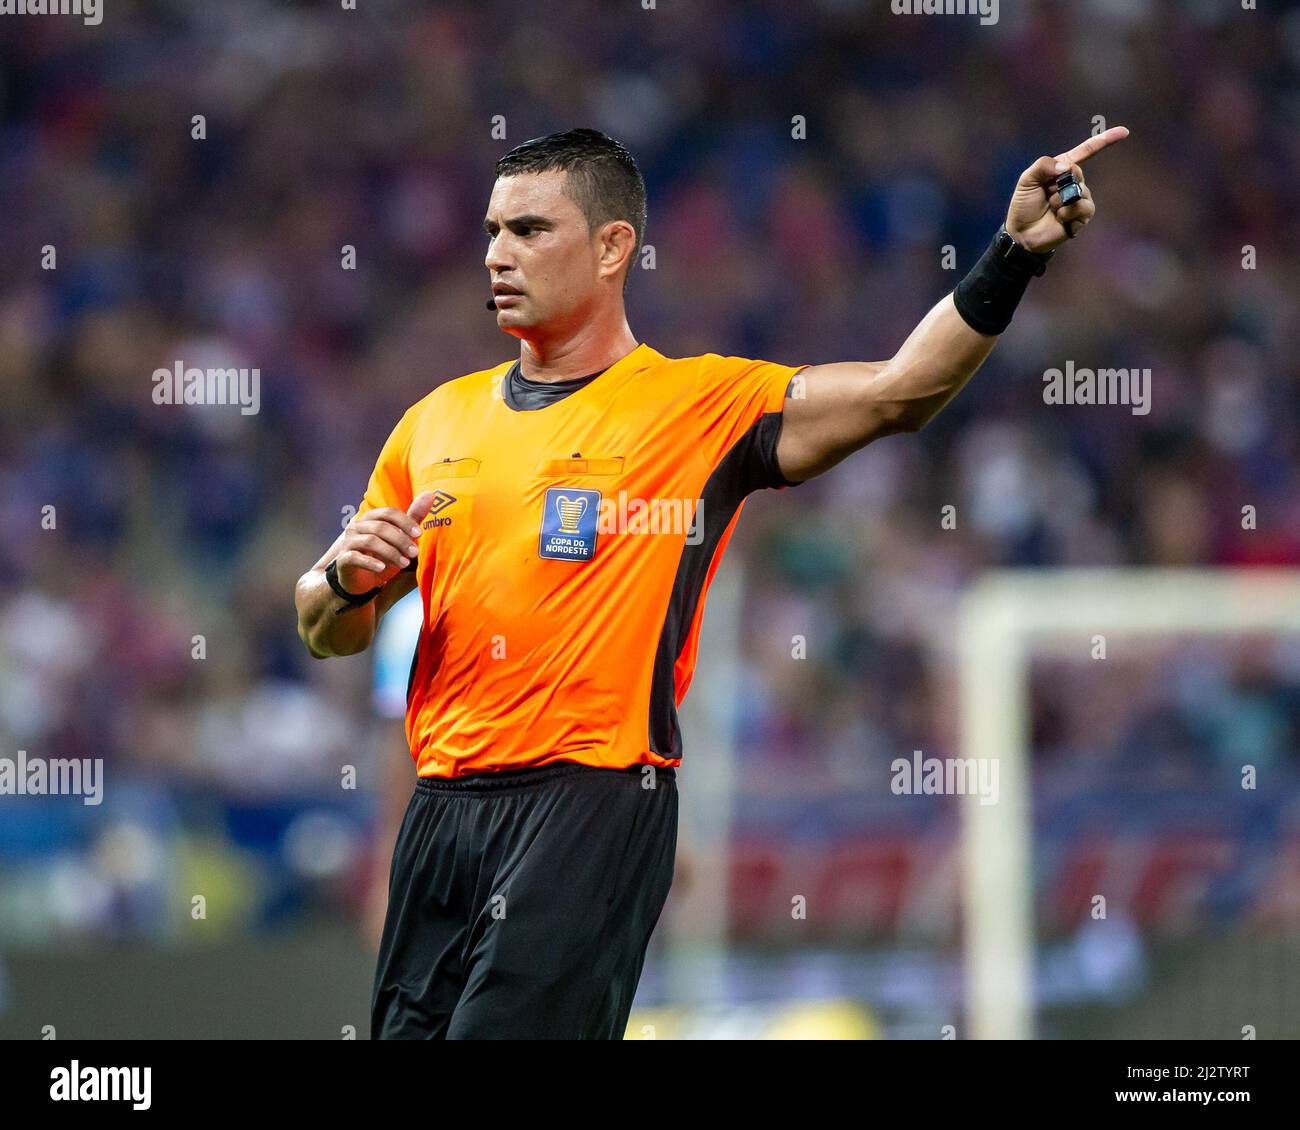 Fortaleza, Brazil. 04th Apr, 2022. CE - Fortaleza - 04/03/2022 - 2022 NORTHEAST CUP FINAL, FORTALEZA X SPORT - Referee Marielson Alves Silva during a match between Fortaleza and Sport at the Arena Castelao stadium for the Copa do Nordeste 2022 championship. Photo: Pedro Chaves/AGIF Credit: AGIF/Alamy Live News Stock Photo